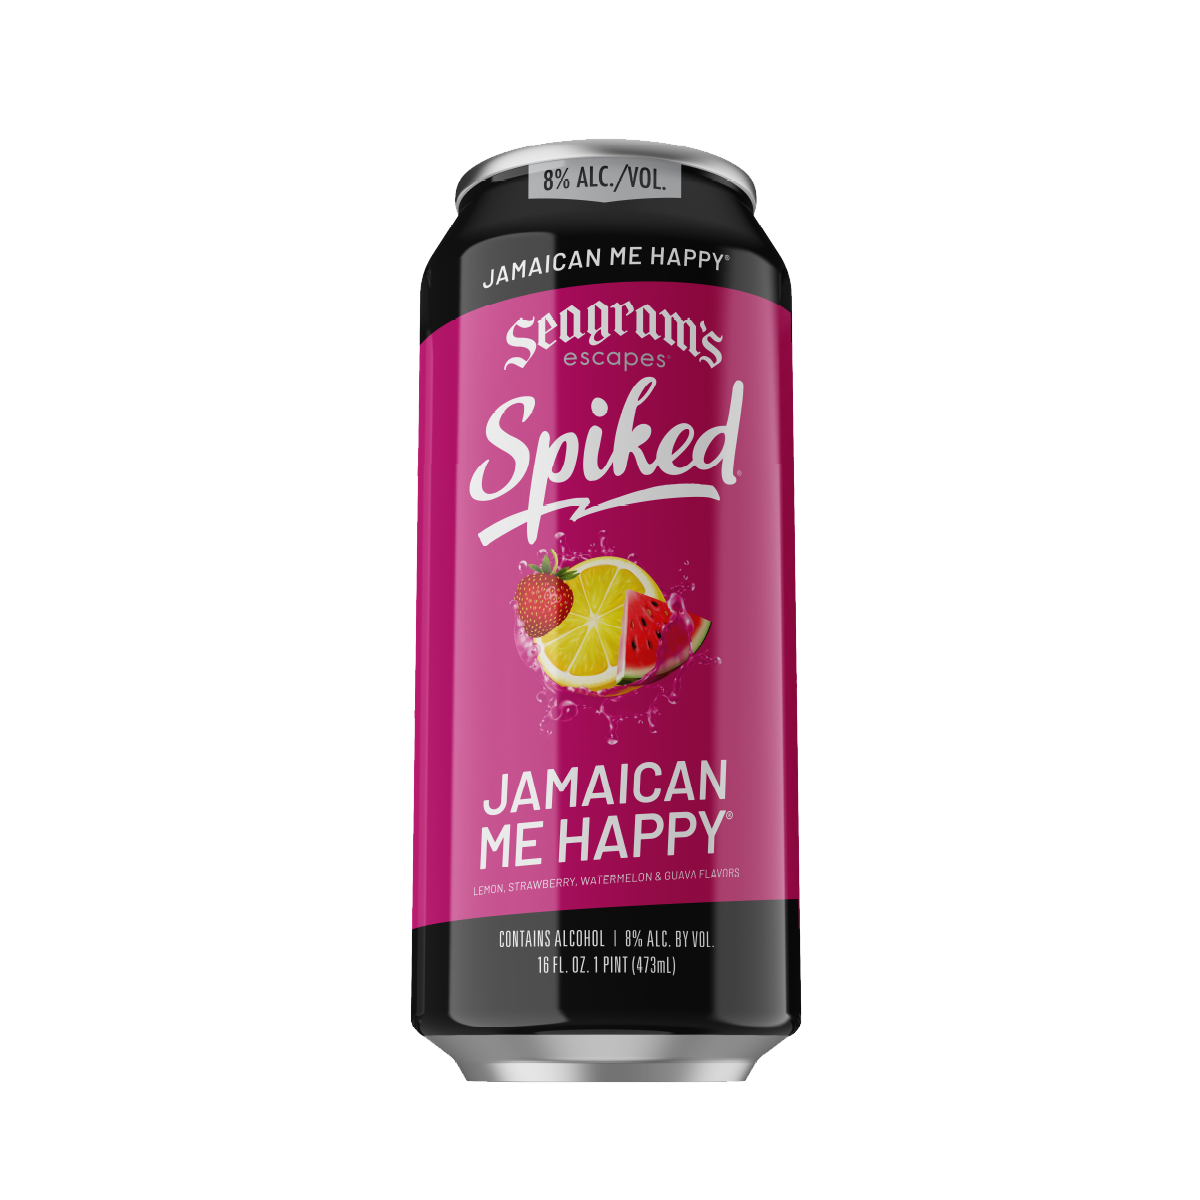 Spiked Jamaican Me Happy